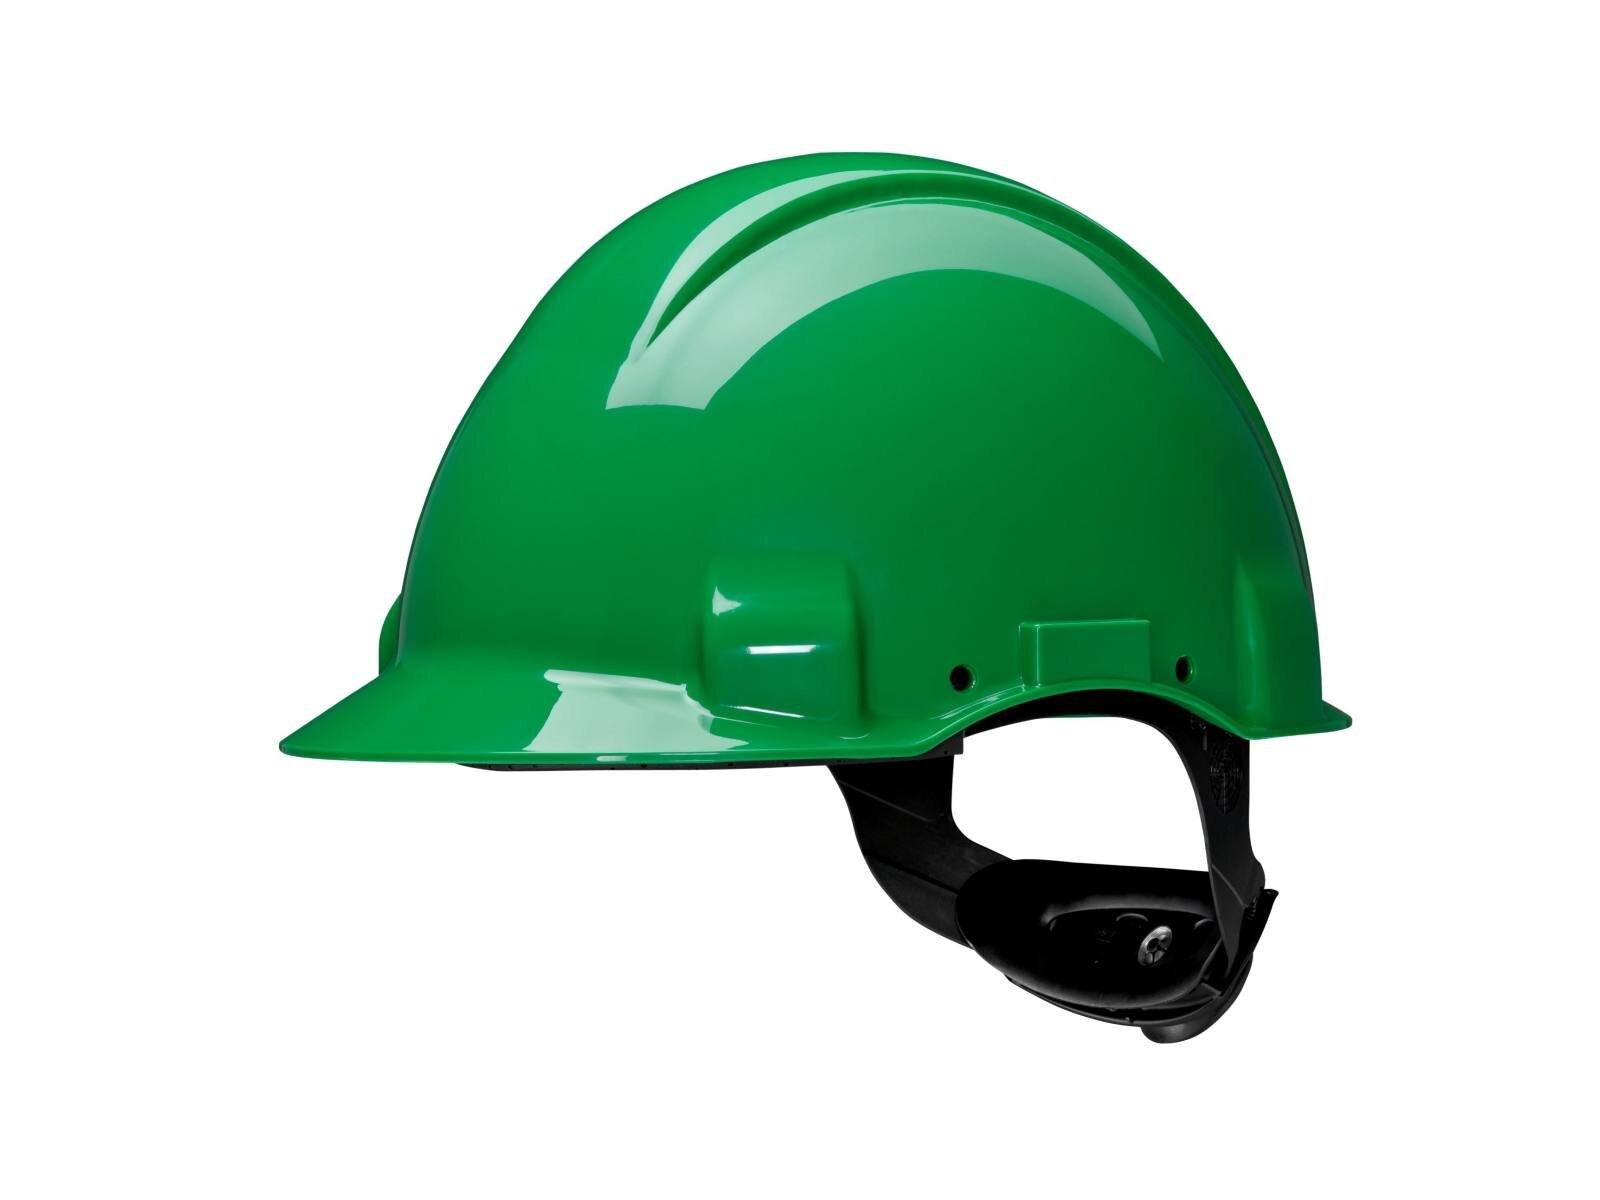 3M Safety helmet, Uvicator, pinlock fastener, non-ventilated, dielectric 440 V, plastic welding tape, green, G3001CUV-GP